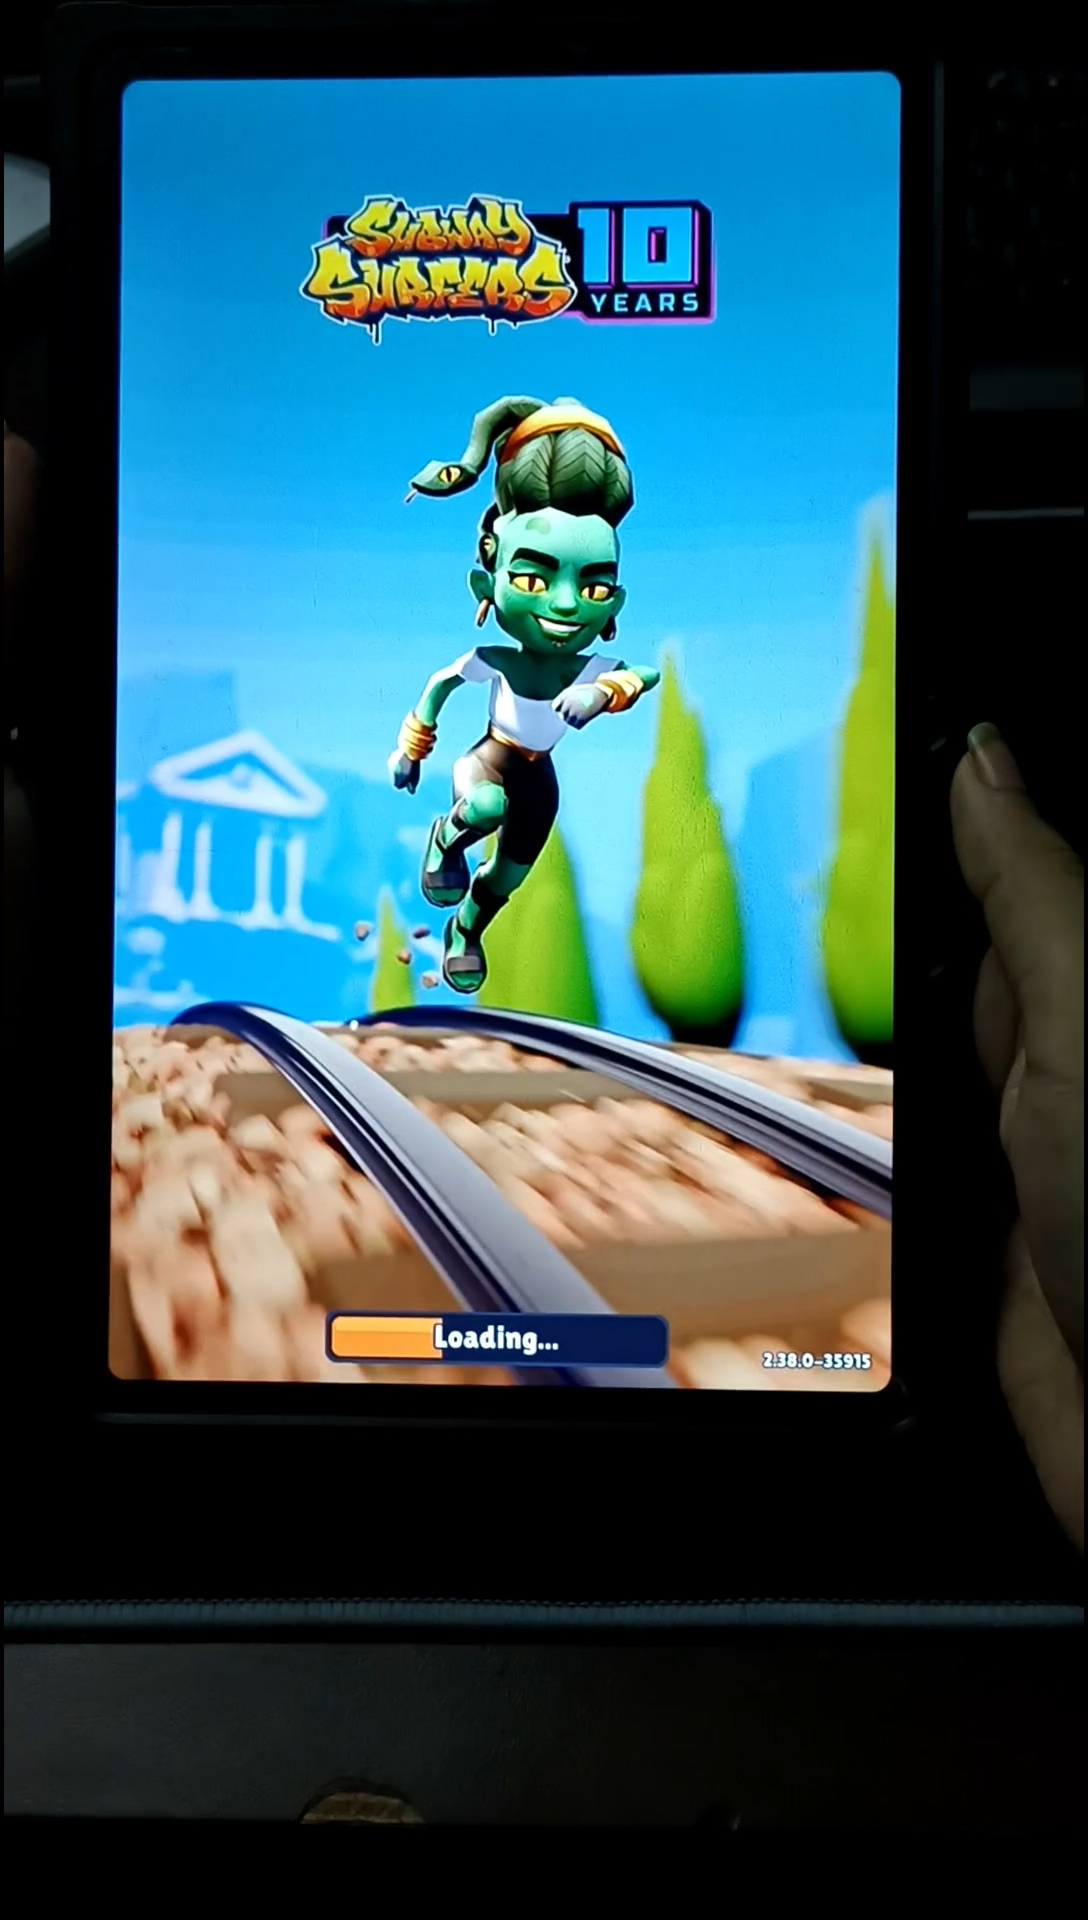 Gaming Experience On OPPO Pad Air